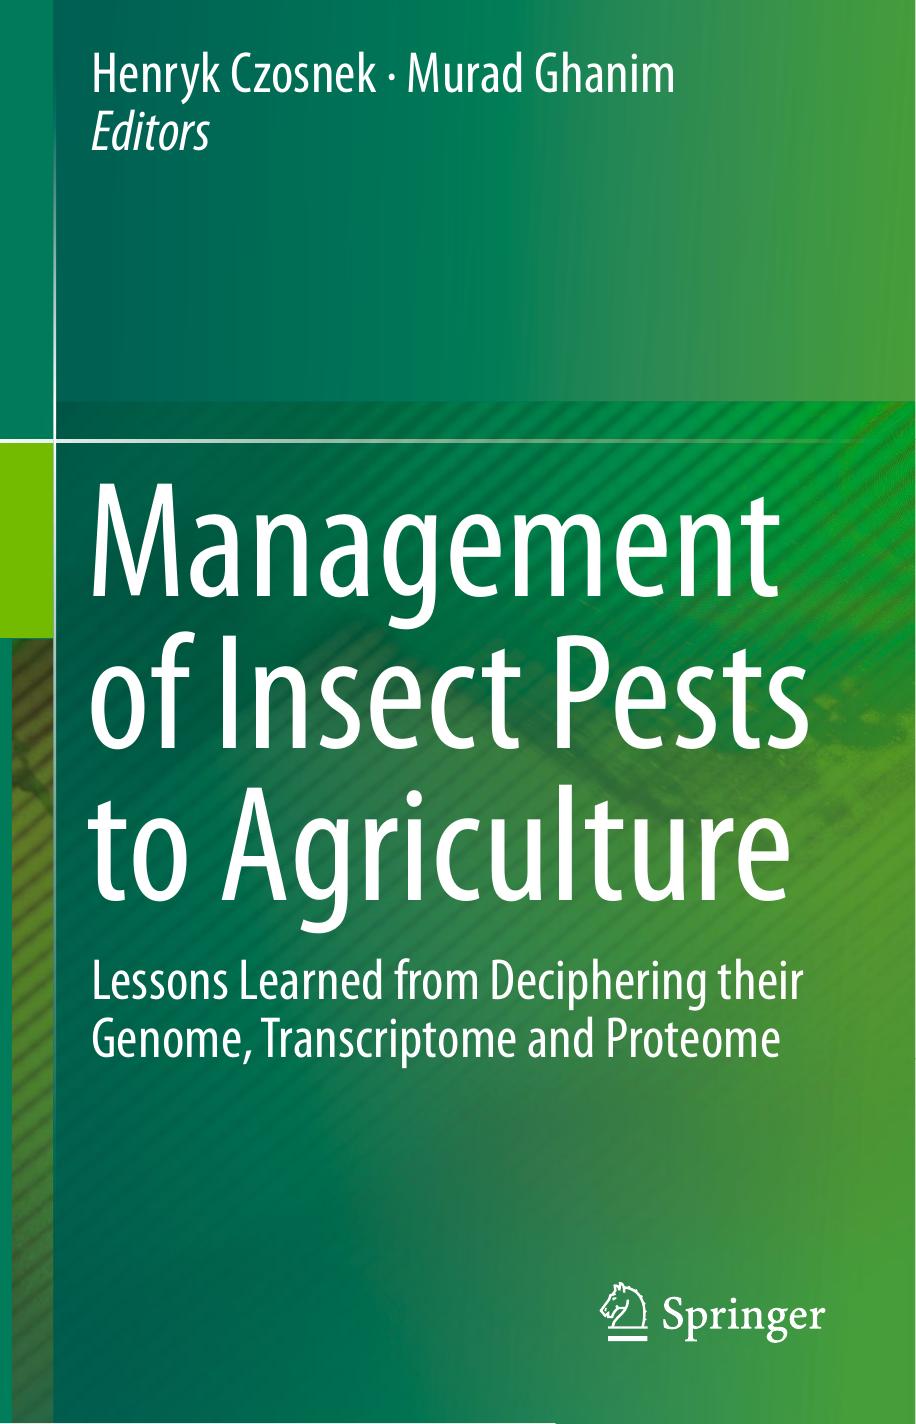 Management of Insect Pests to Agriculture, 2016